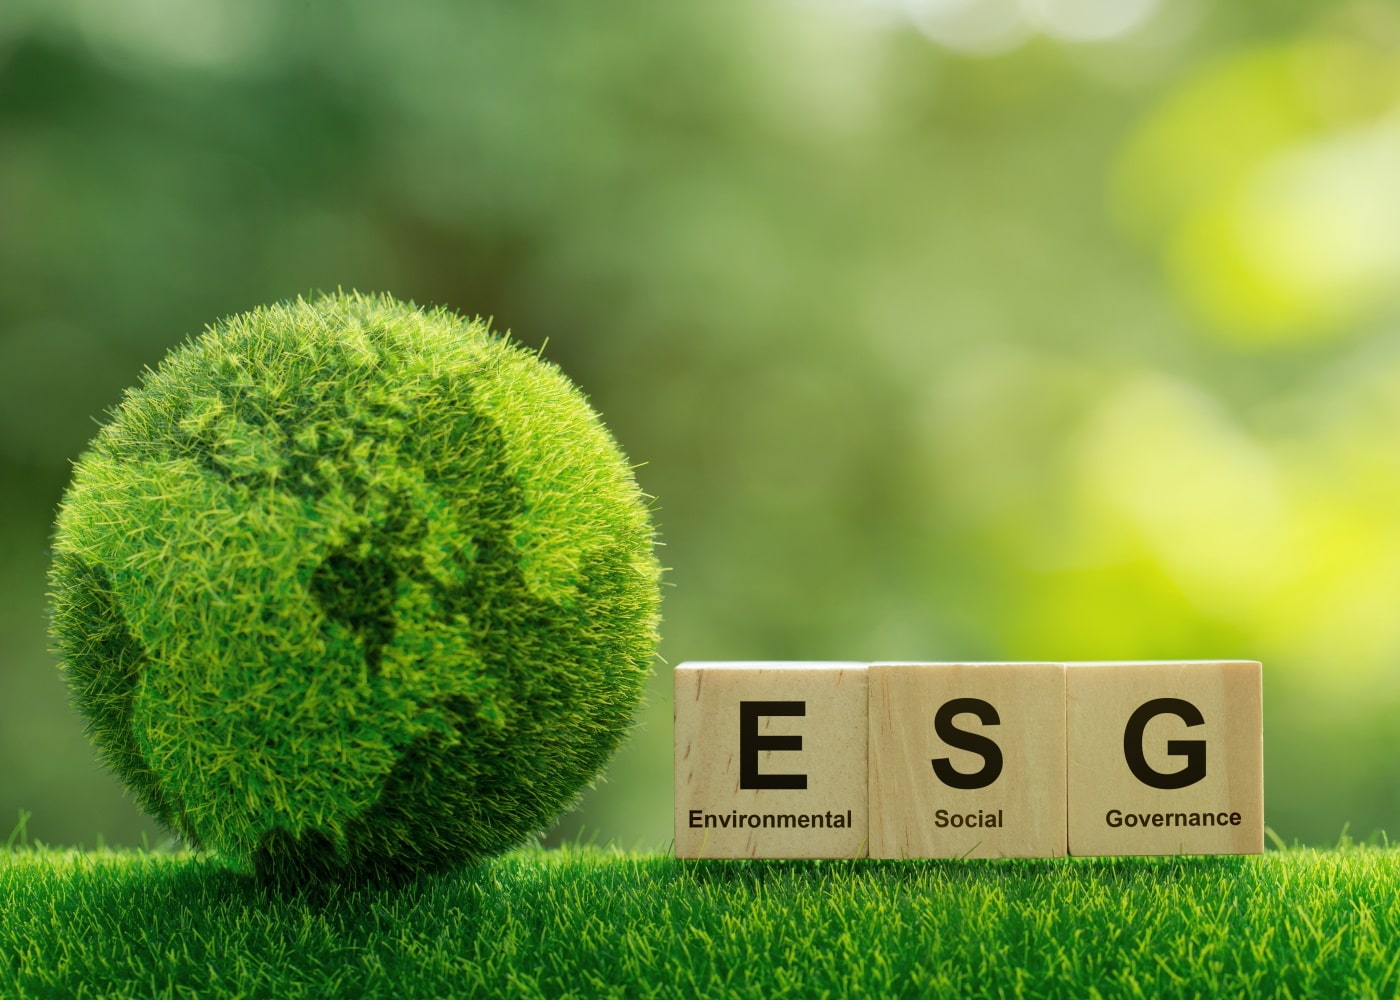 ESG Assurance – an opportunity for transparency and trust